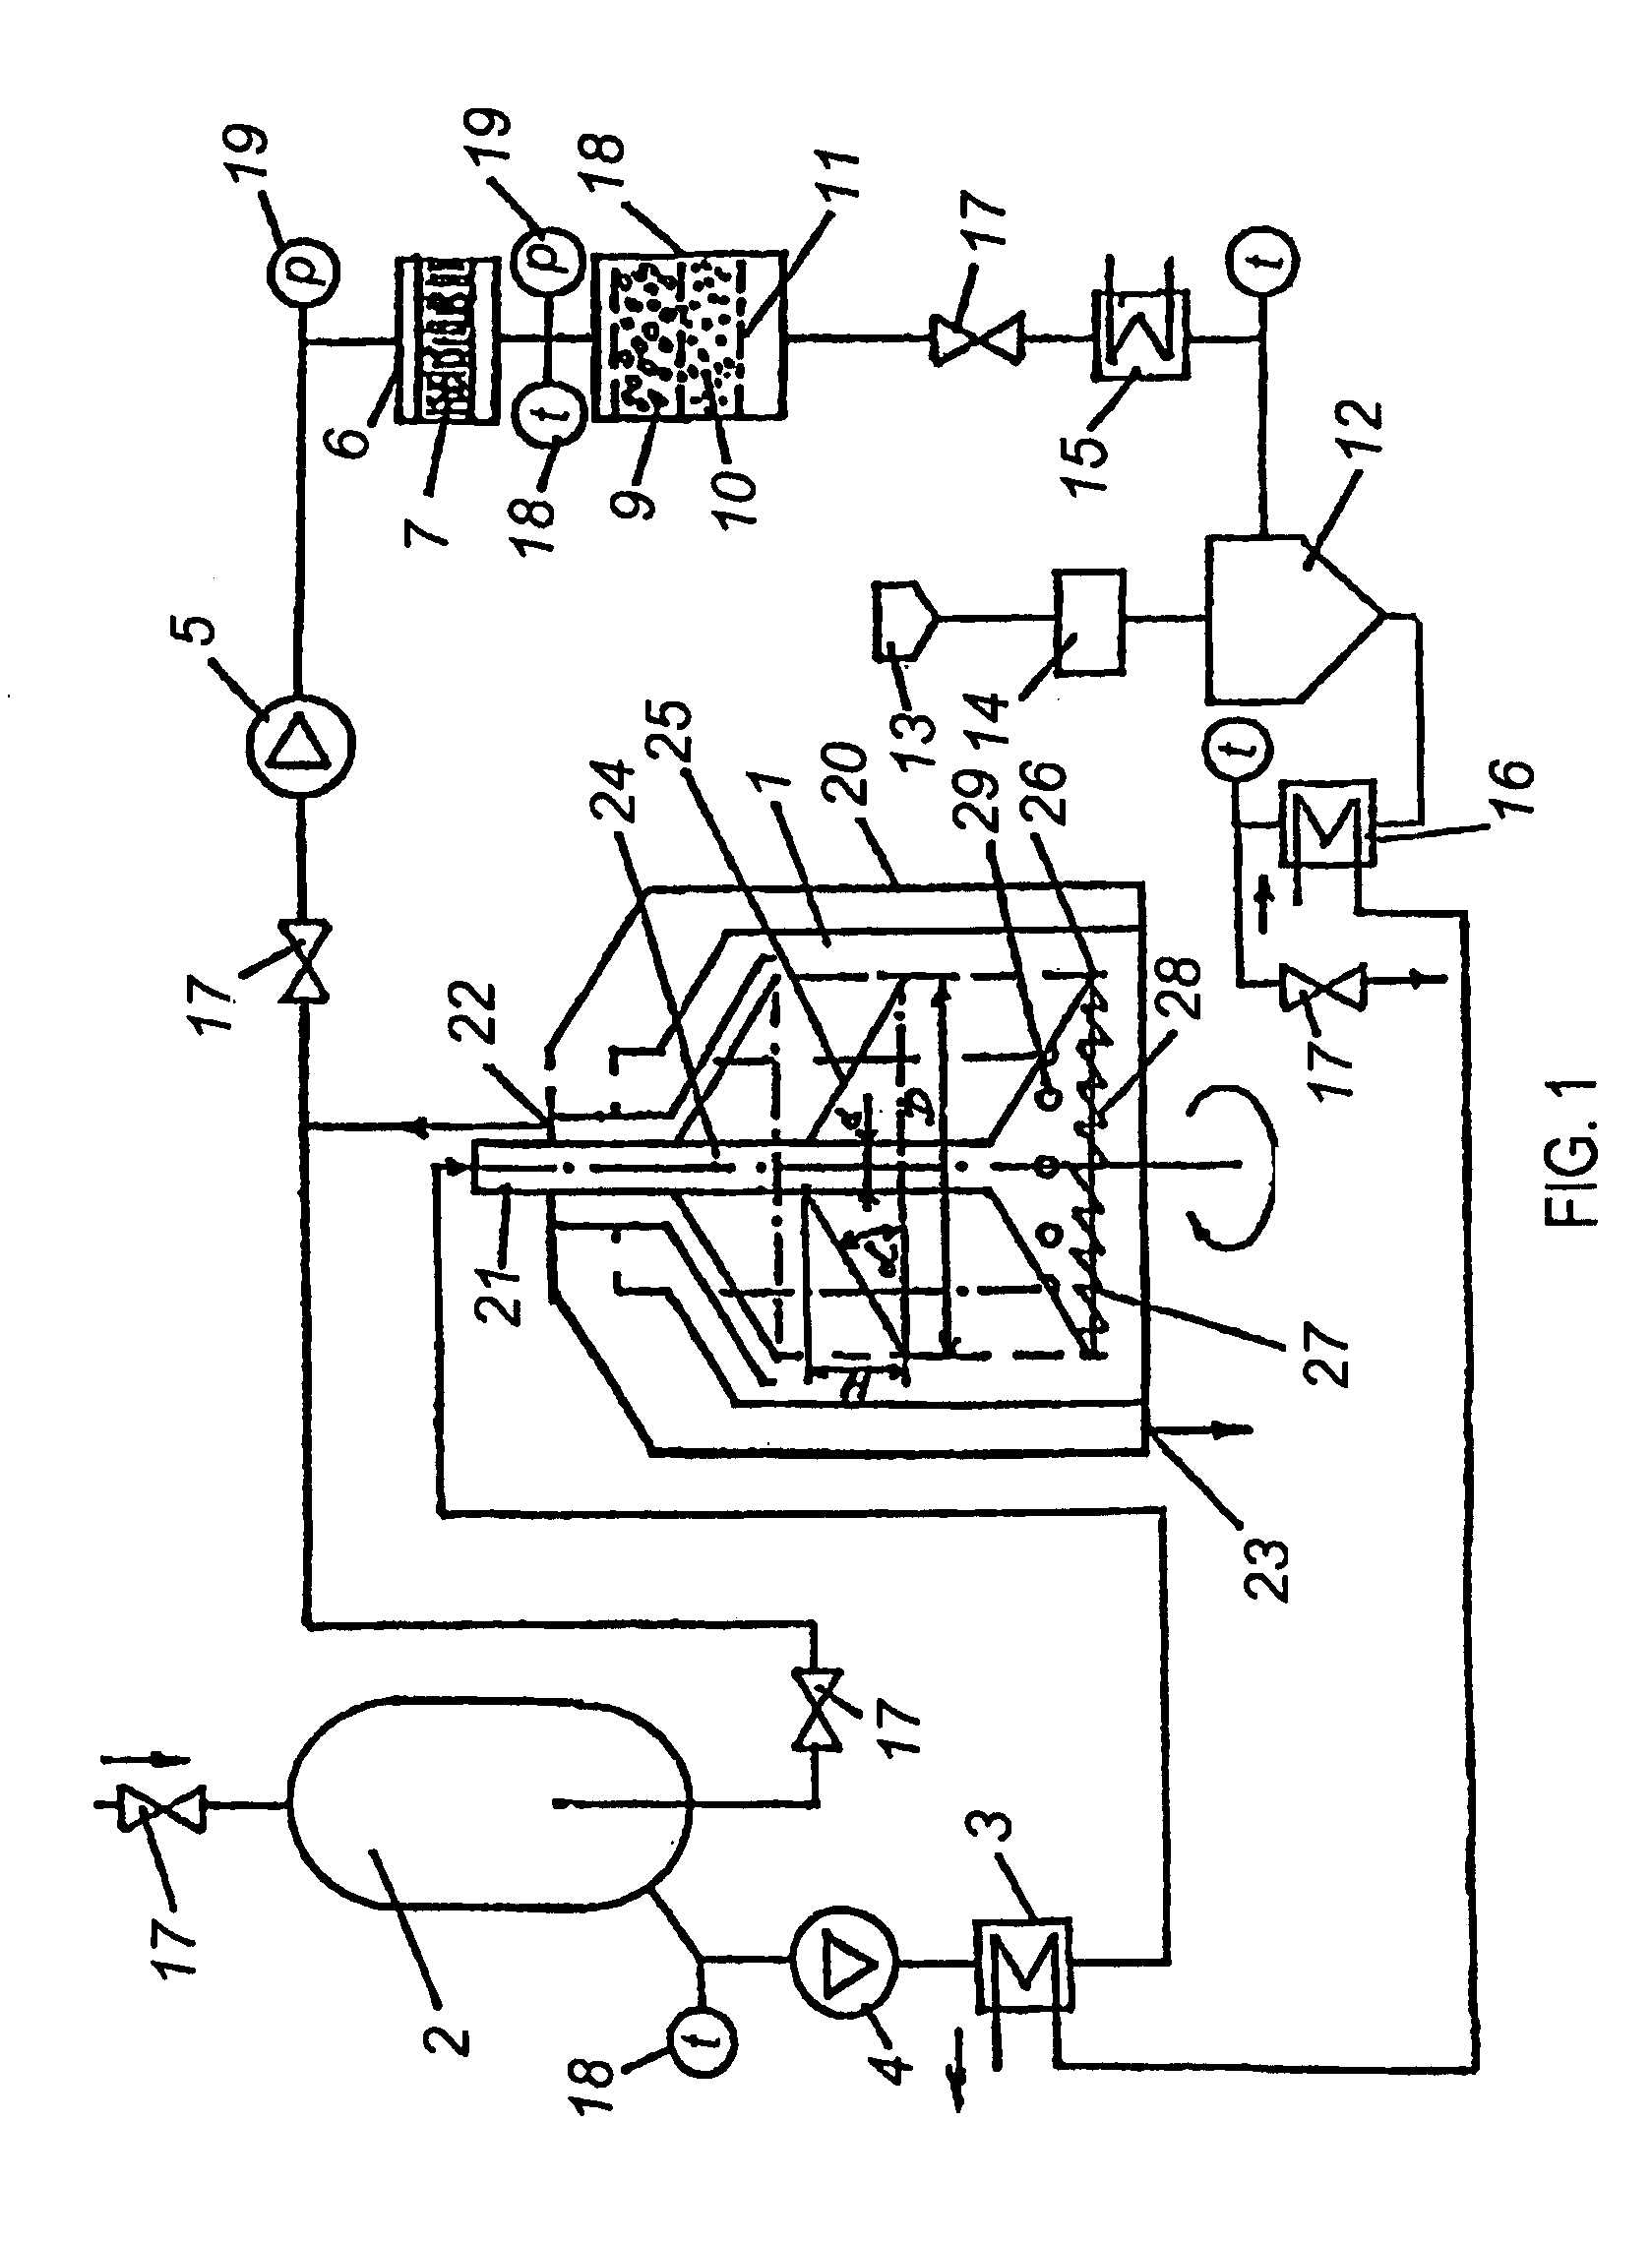 Method for combined processing of diesel fuel